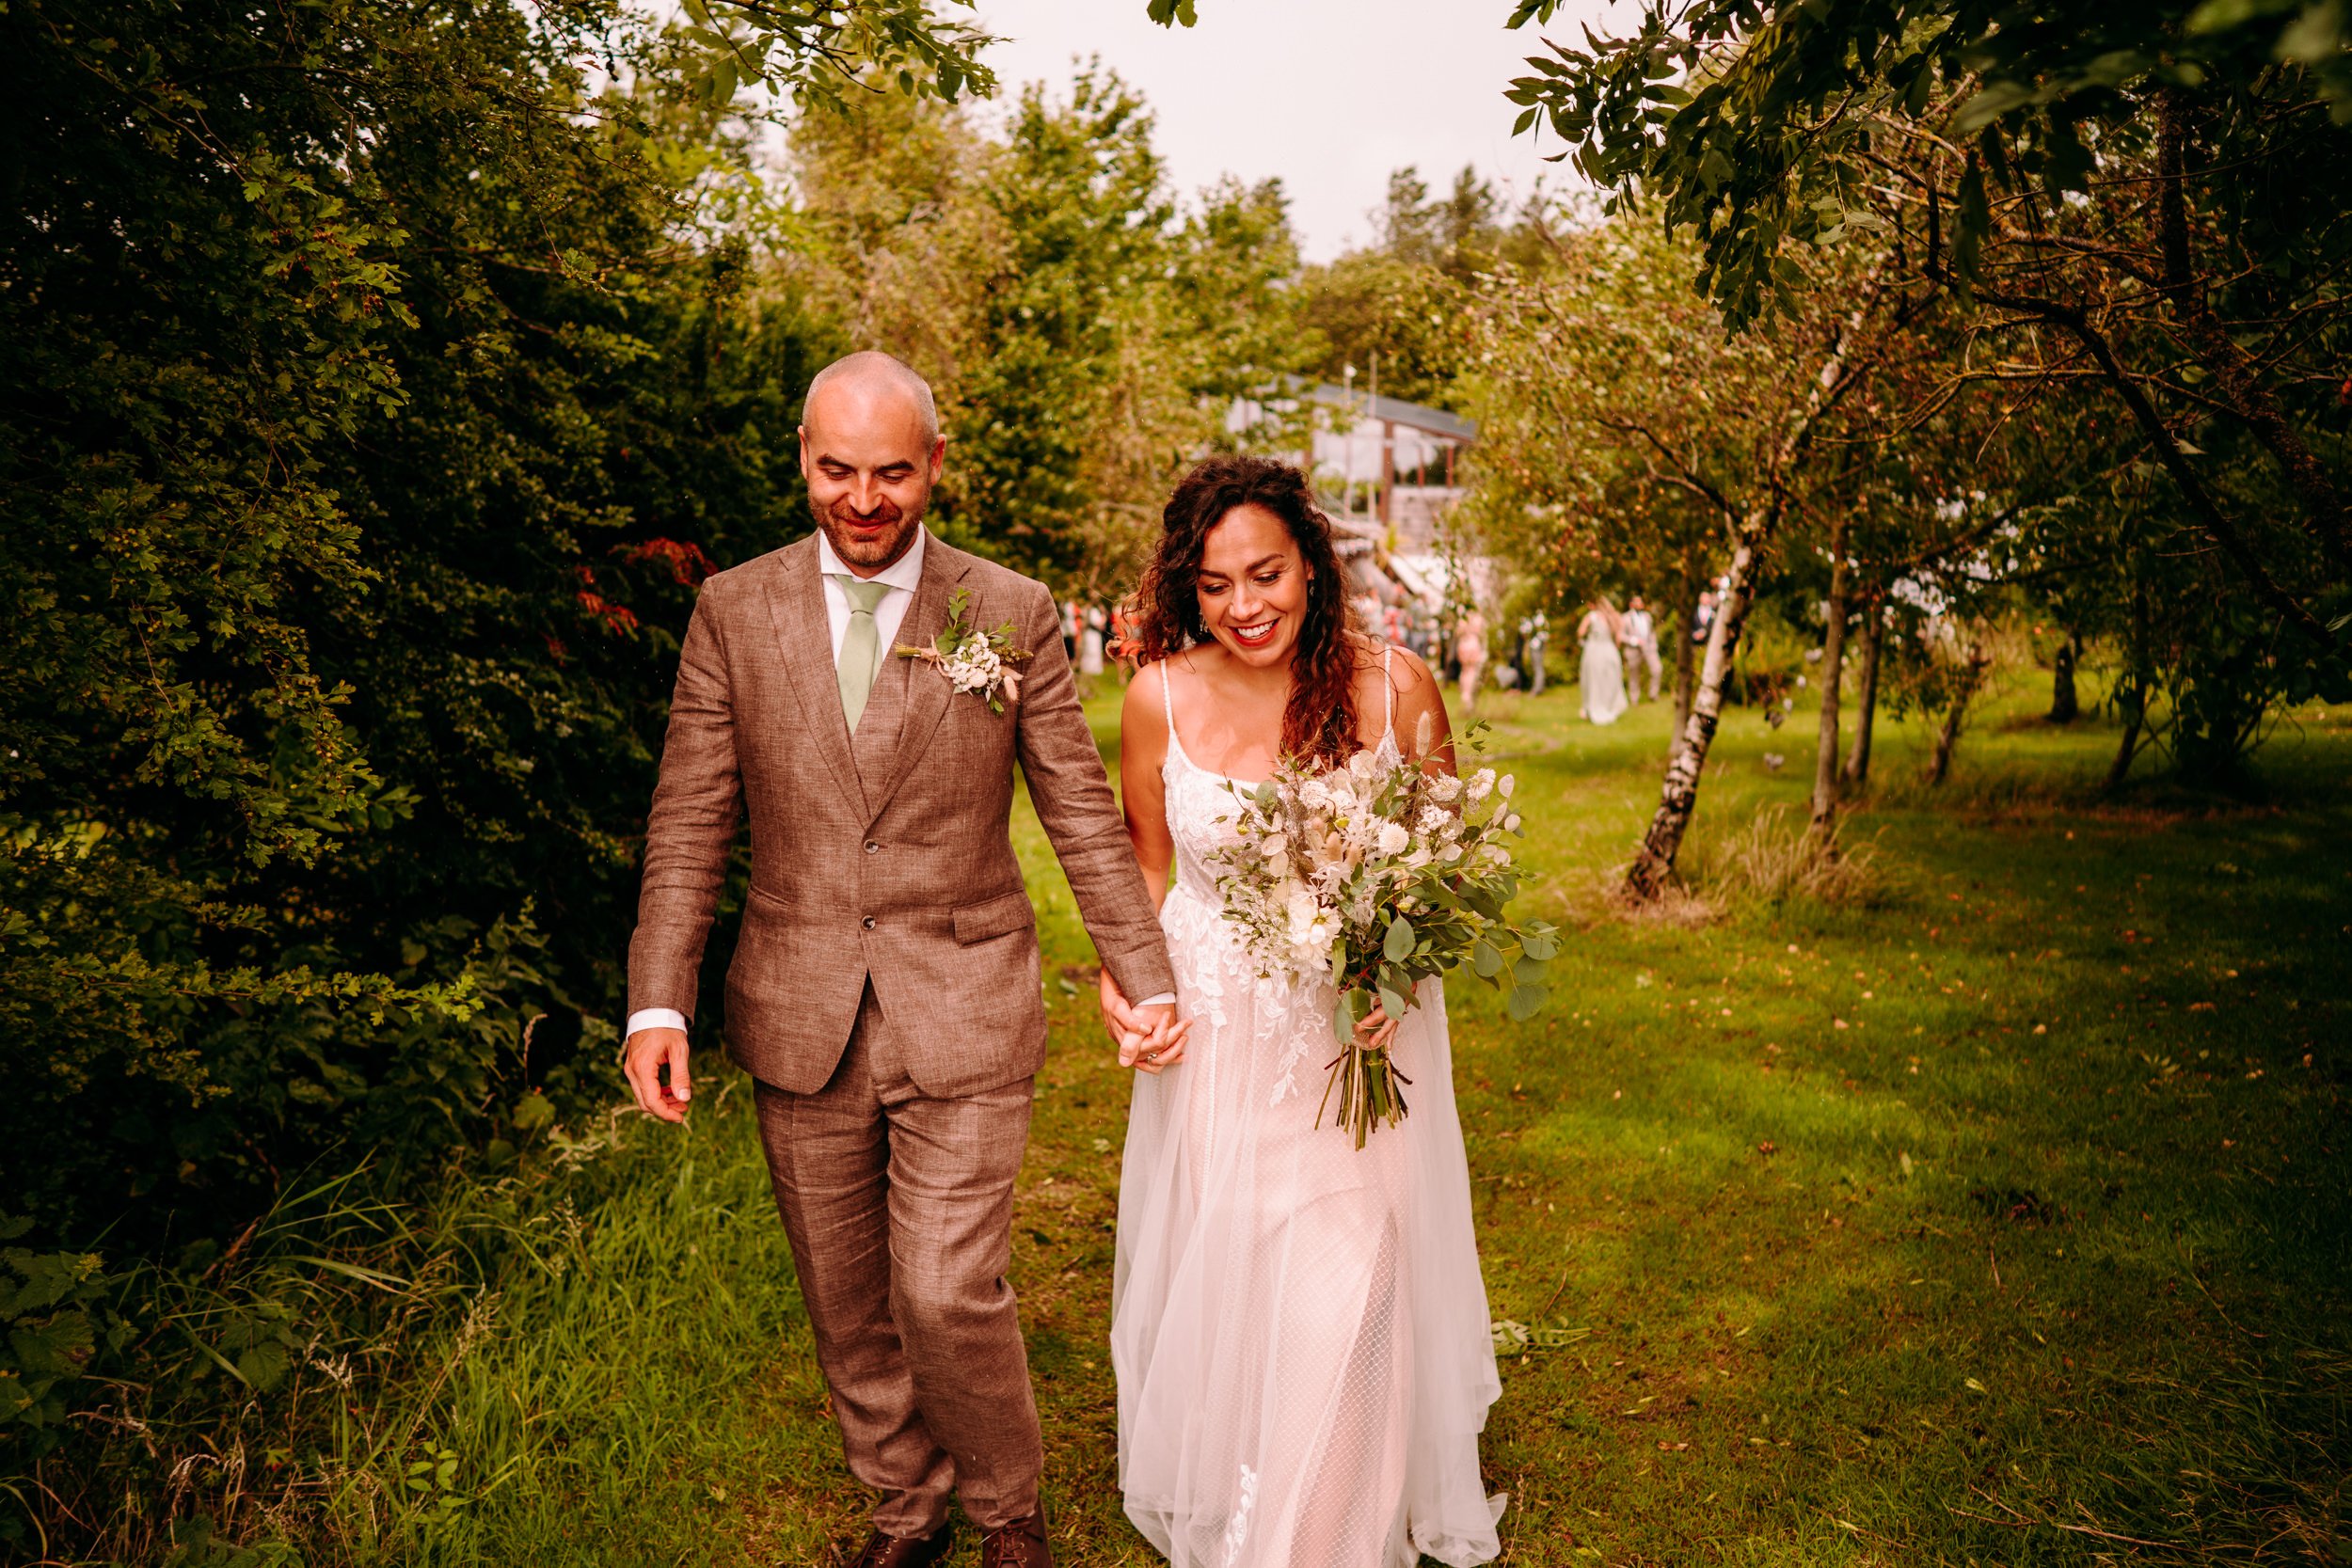  coed weddings cardiff natural fun relaxed photographers 